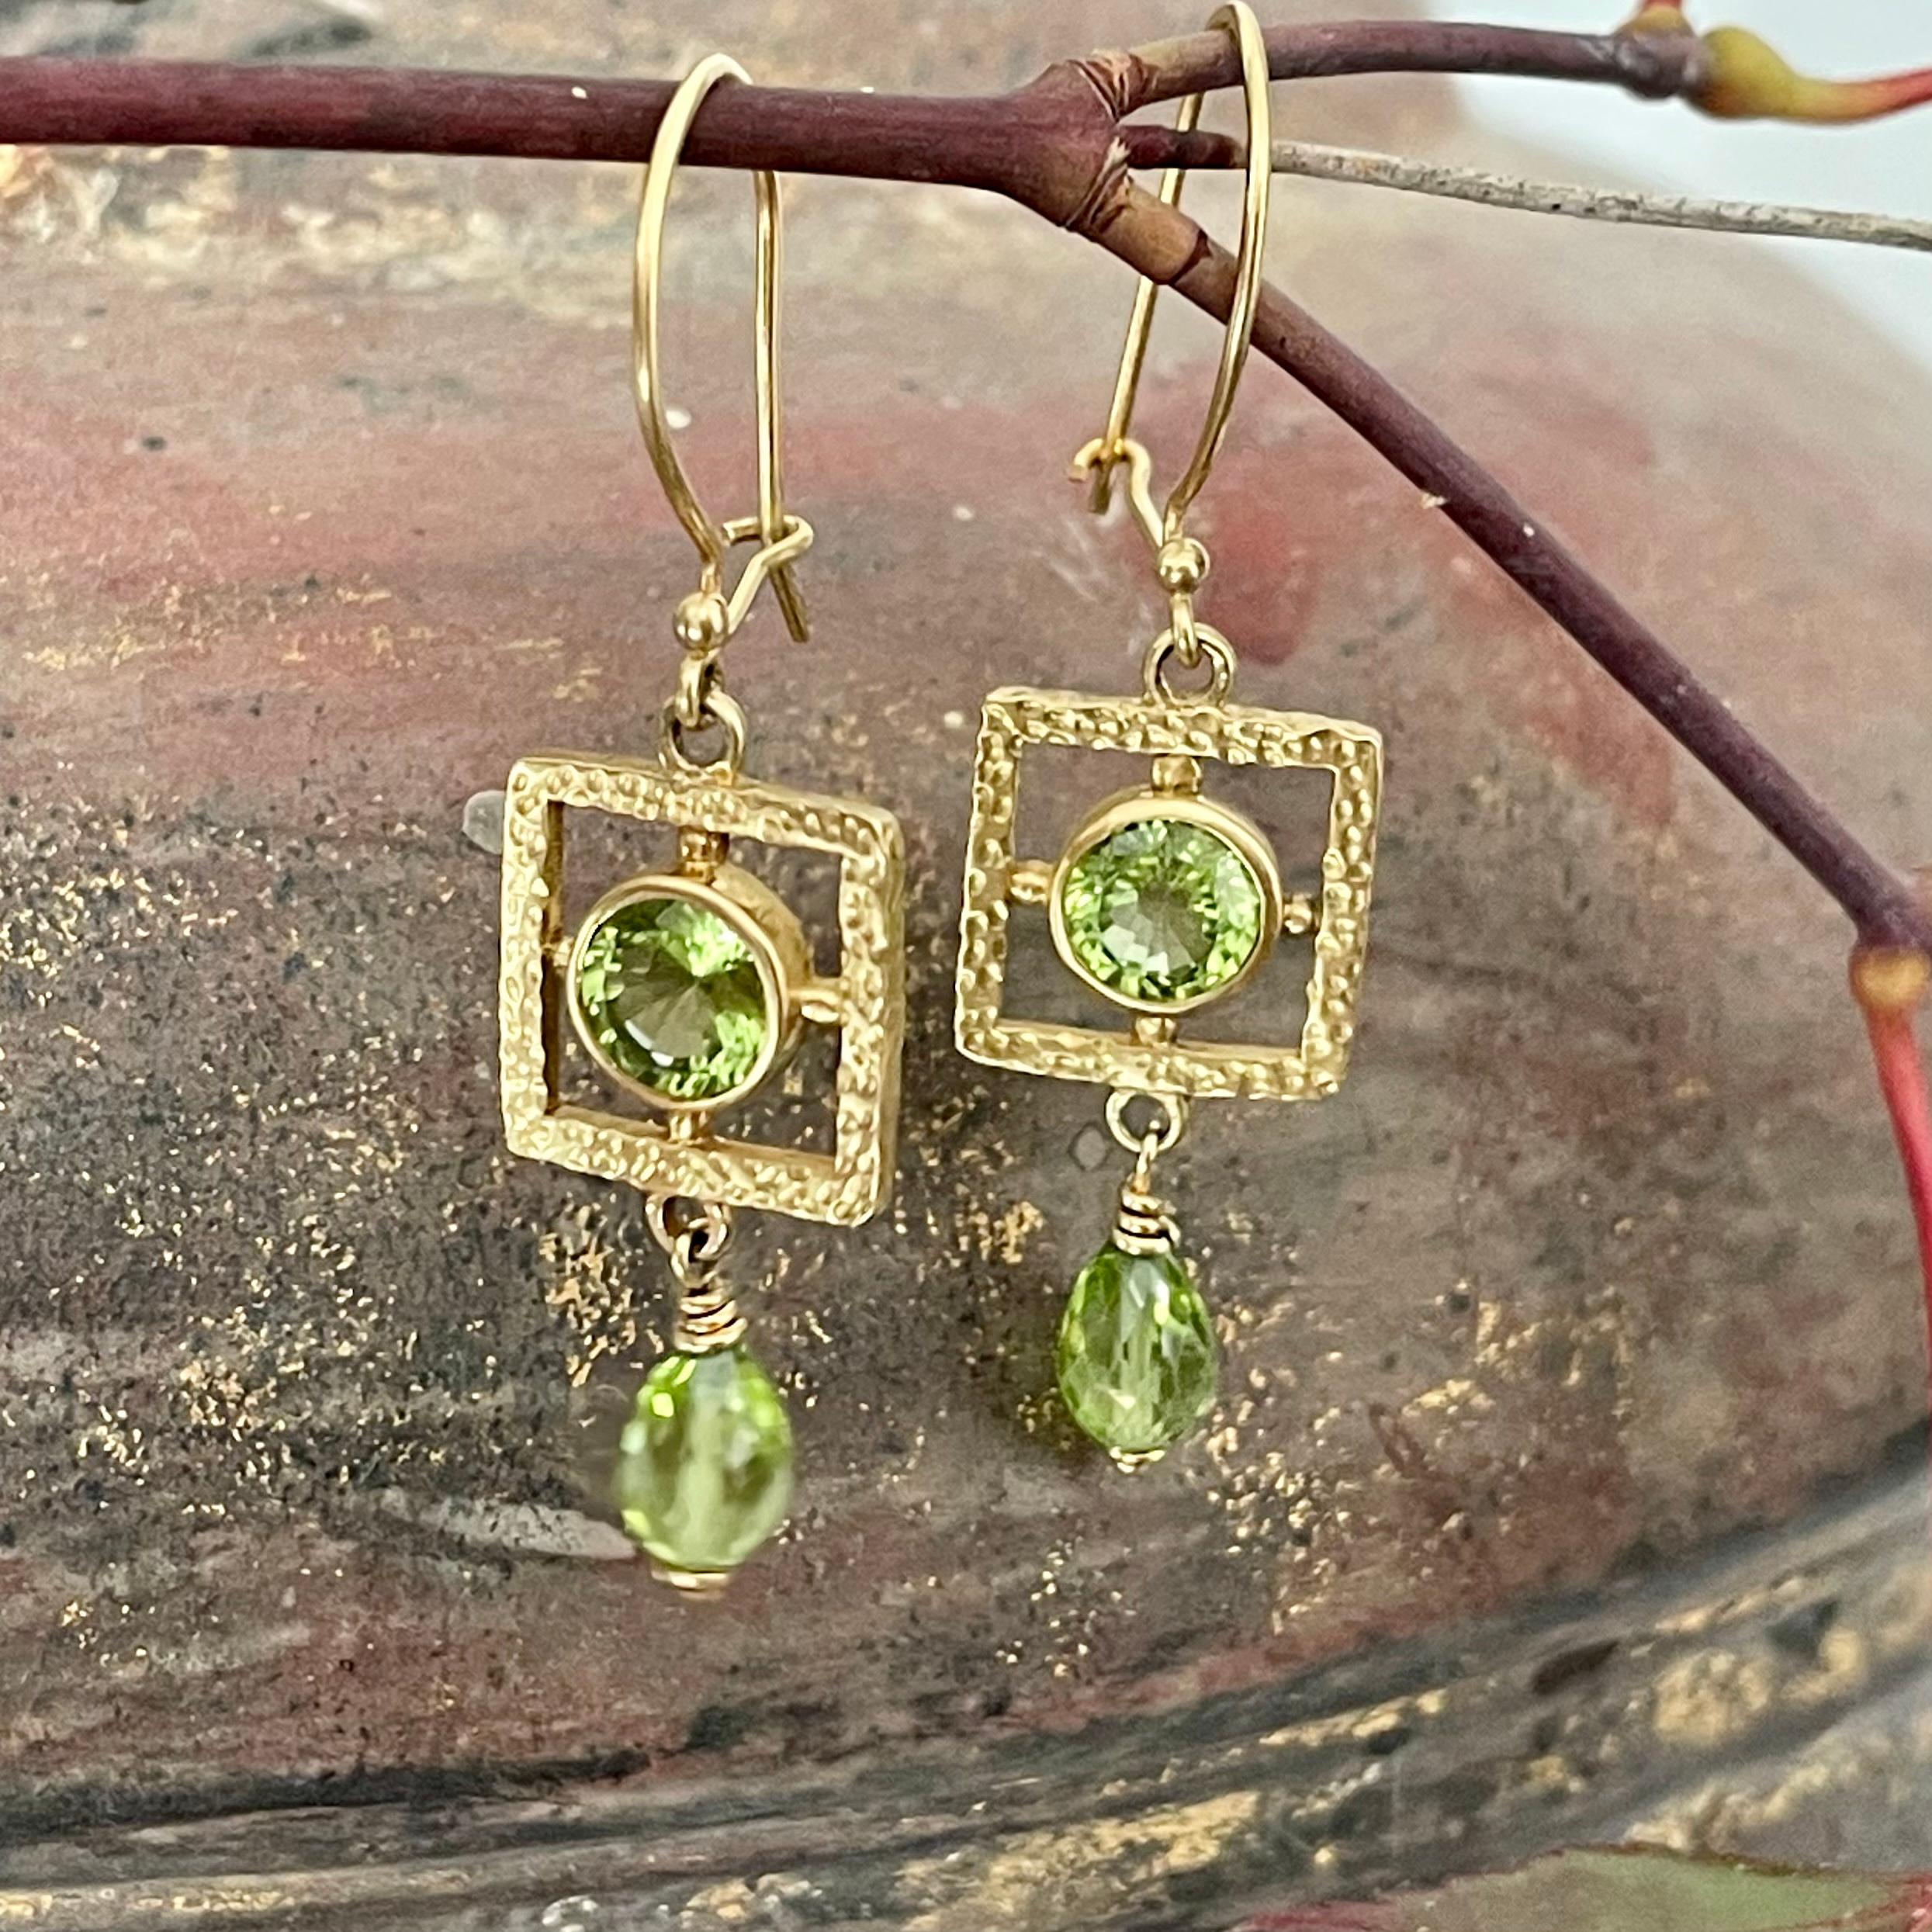 Two 6 mm round faceted peridots are centered within textured and hammered gold squares beneath safety clasp wires.  6 x 8 faceted peridot beads dangle below.  A whimsical juxtaposition of circles squares and ovals.  Sweet.